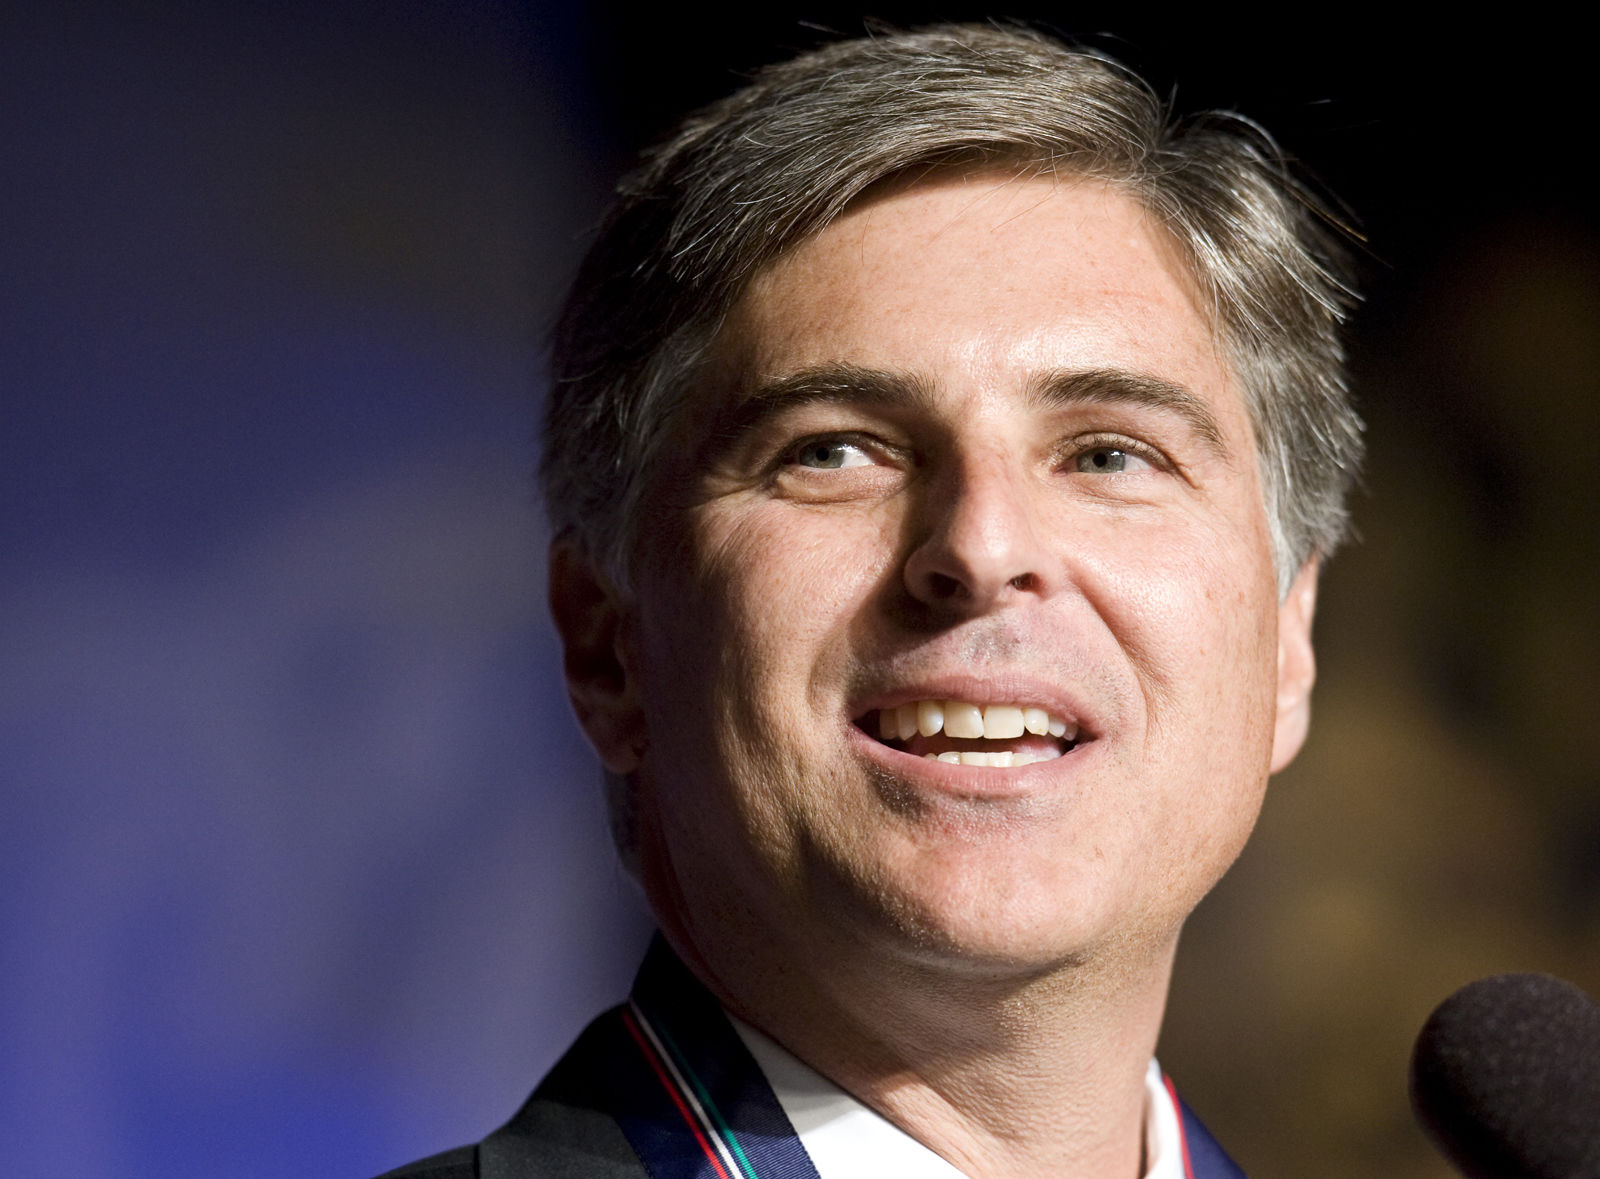 Christopher Nassetta, the CEO of Hilton Worldwide based out of McLean, Virginia, ranked No. 51 on Glassdoor's list of the top 100 CEOs in the U.S. in 2018. He ranked highest among four CEOs whose companies are based in the D.C. area. File. (AP Photo/Cliff Owen)